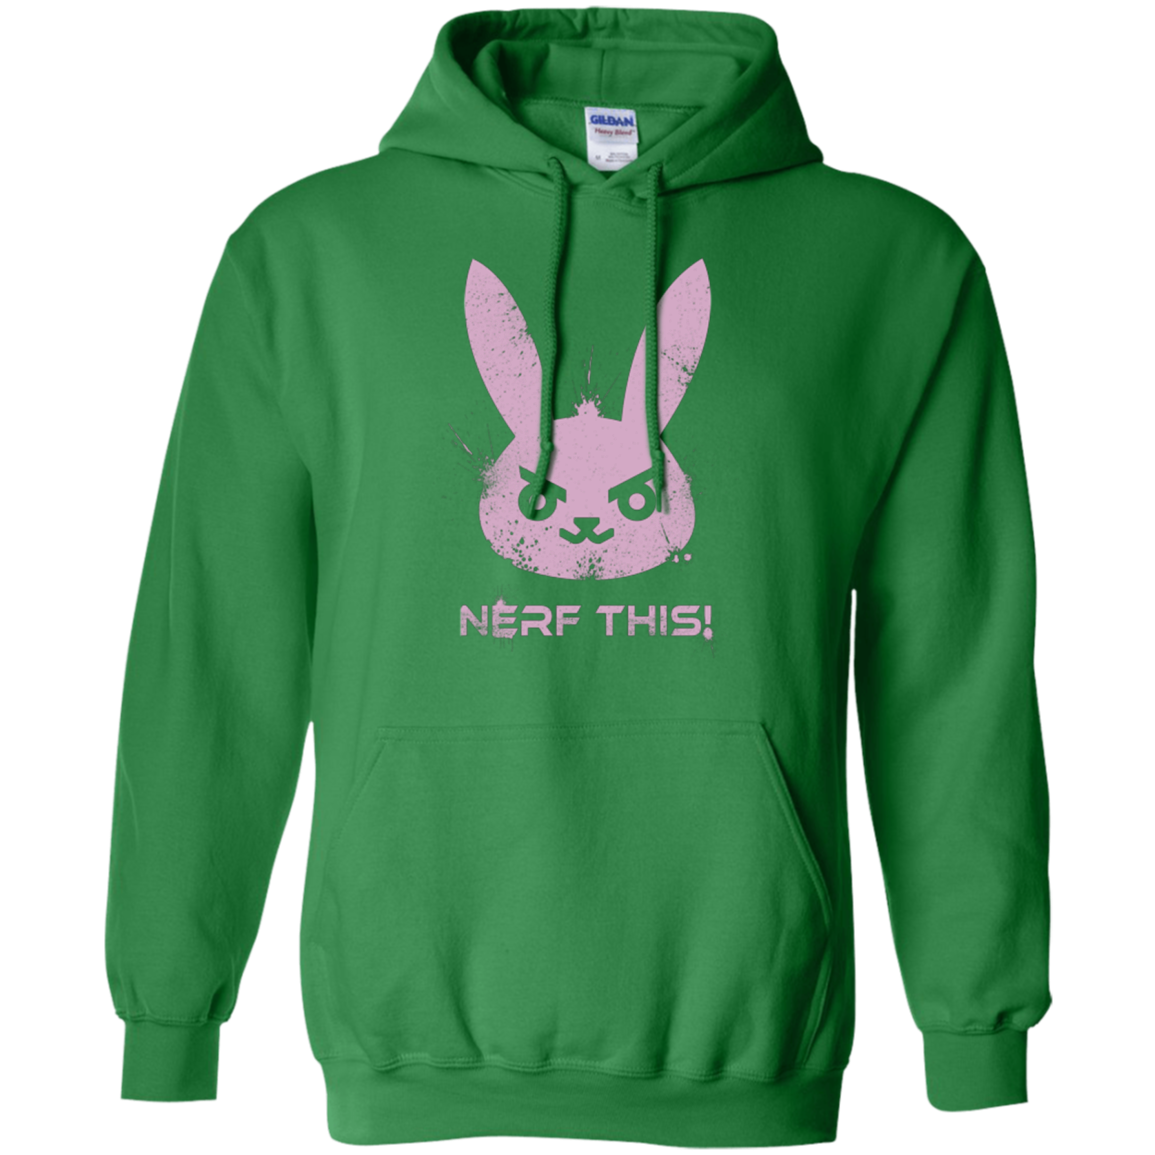 Nerf This Pullover Hoodie